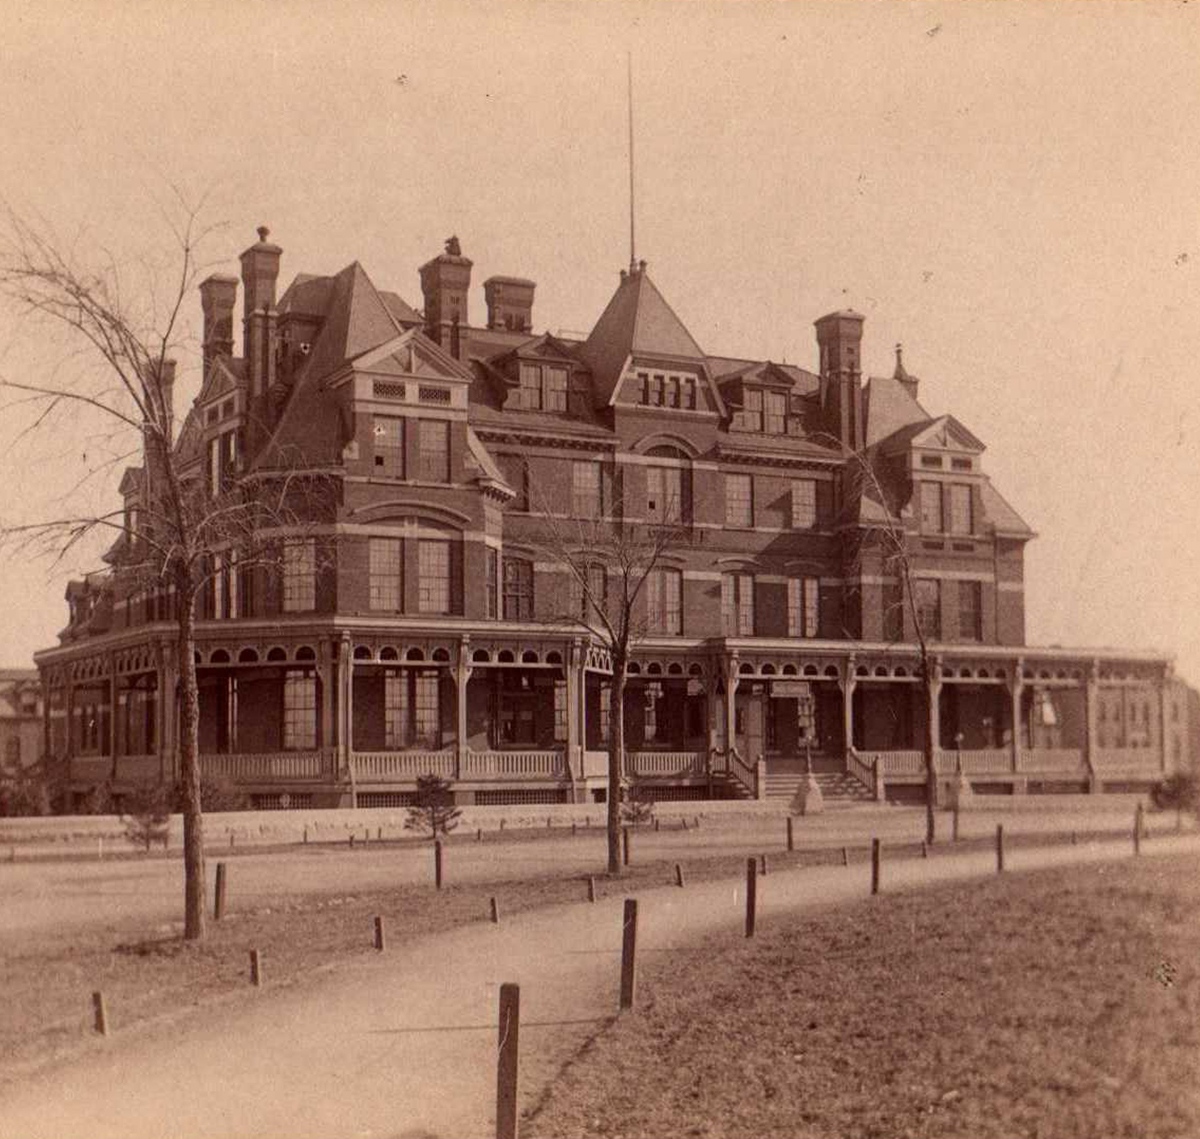 #PhotoFriday is an image of the Hotel Florence in the Town of Pullman, taken by George Glessner about 1888. May 11 marks the 130th anniversary of the start of the Pullman strike, which disrupted rail traffic across much of the United States.